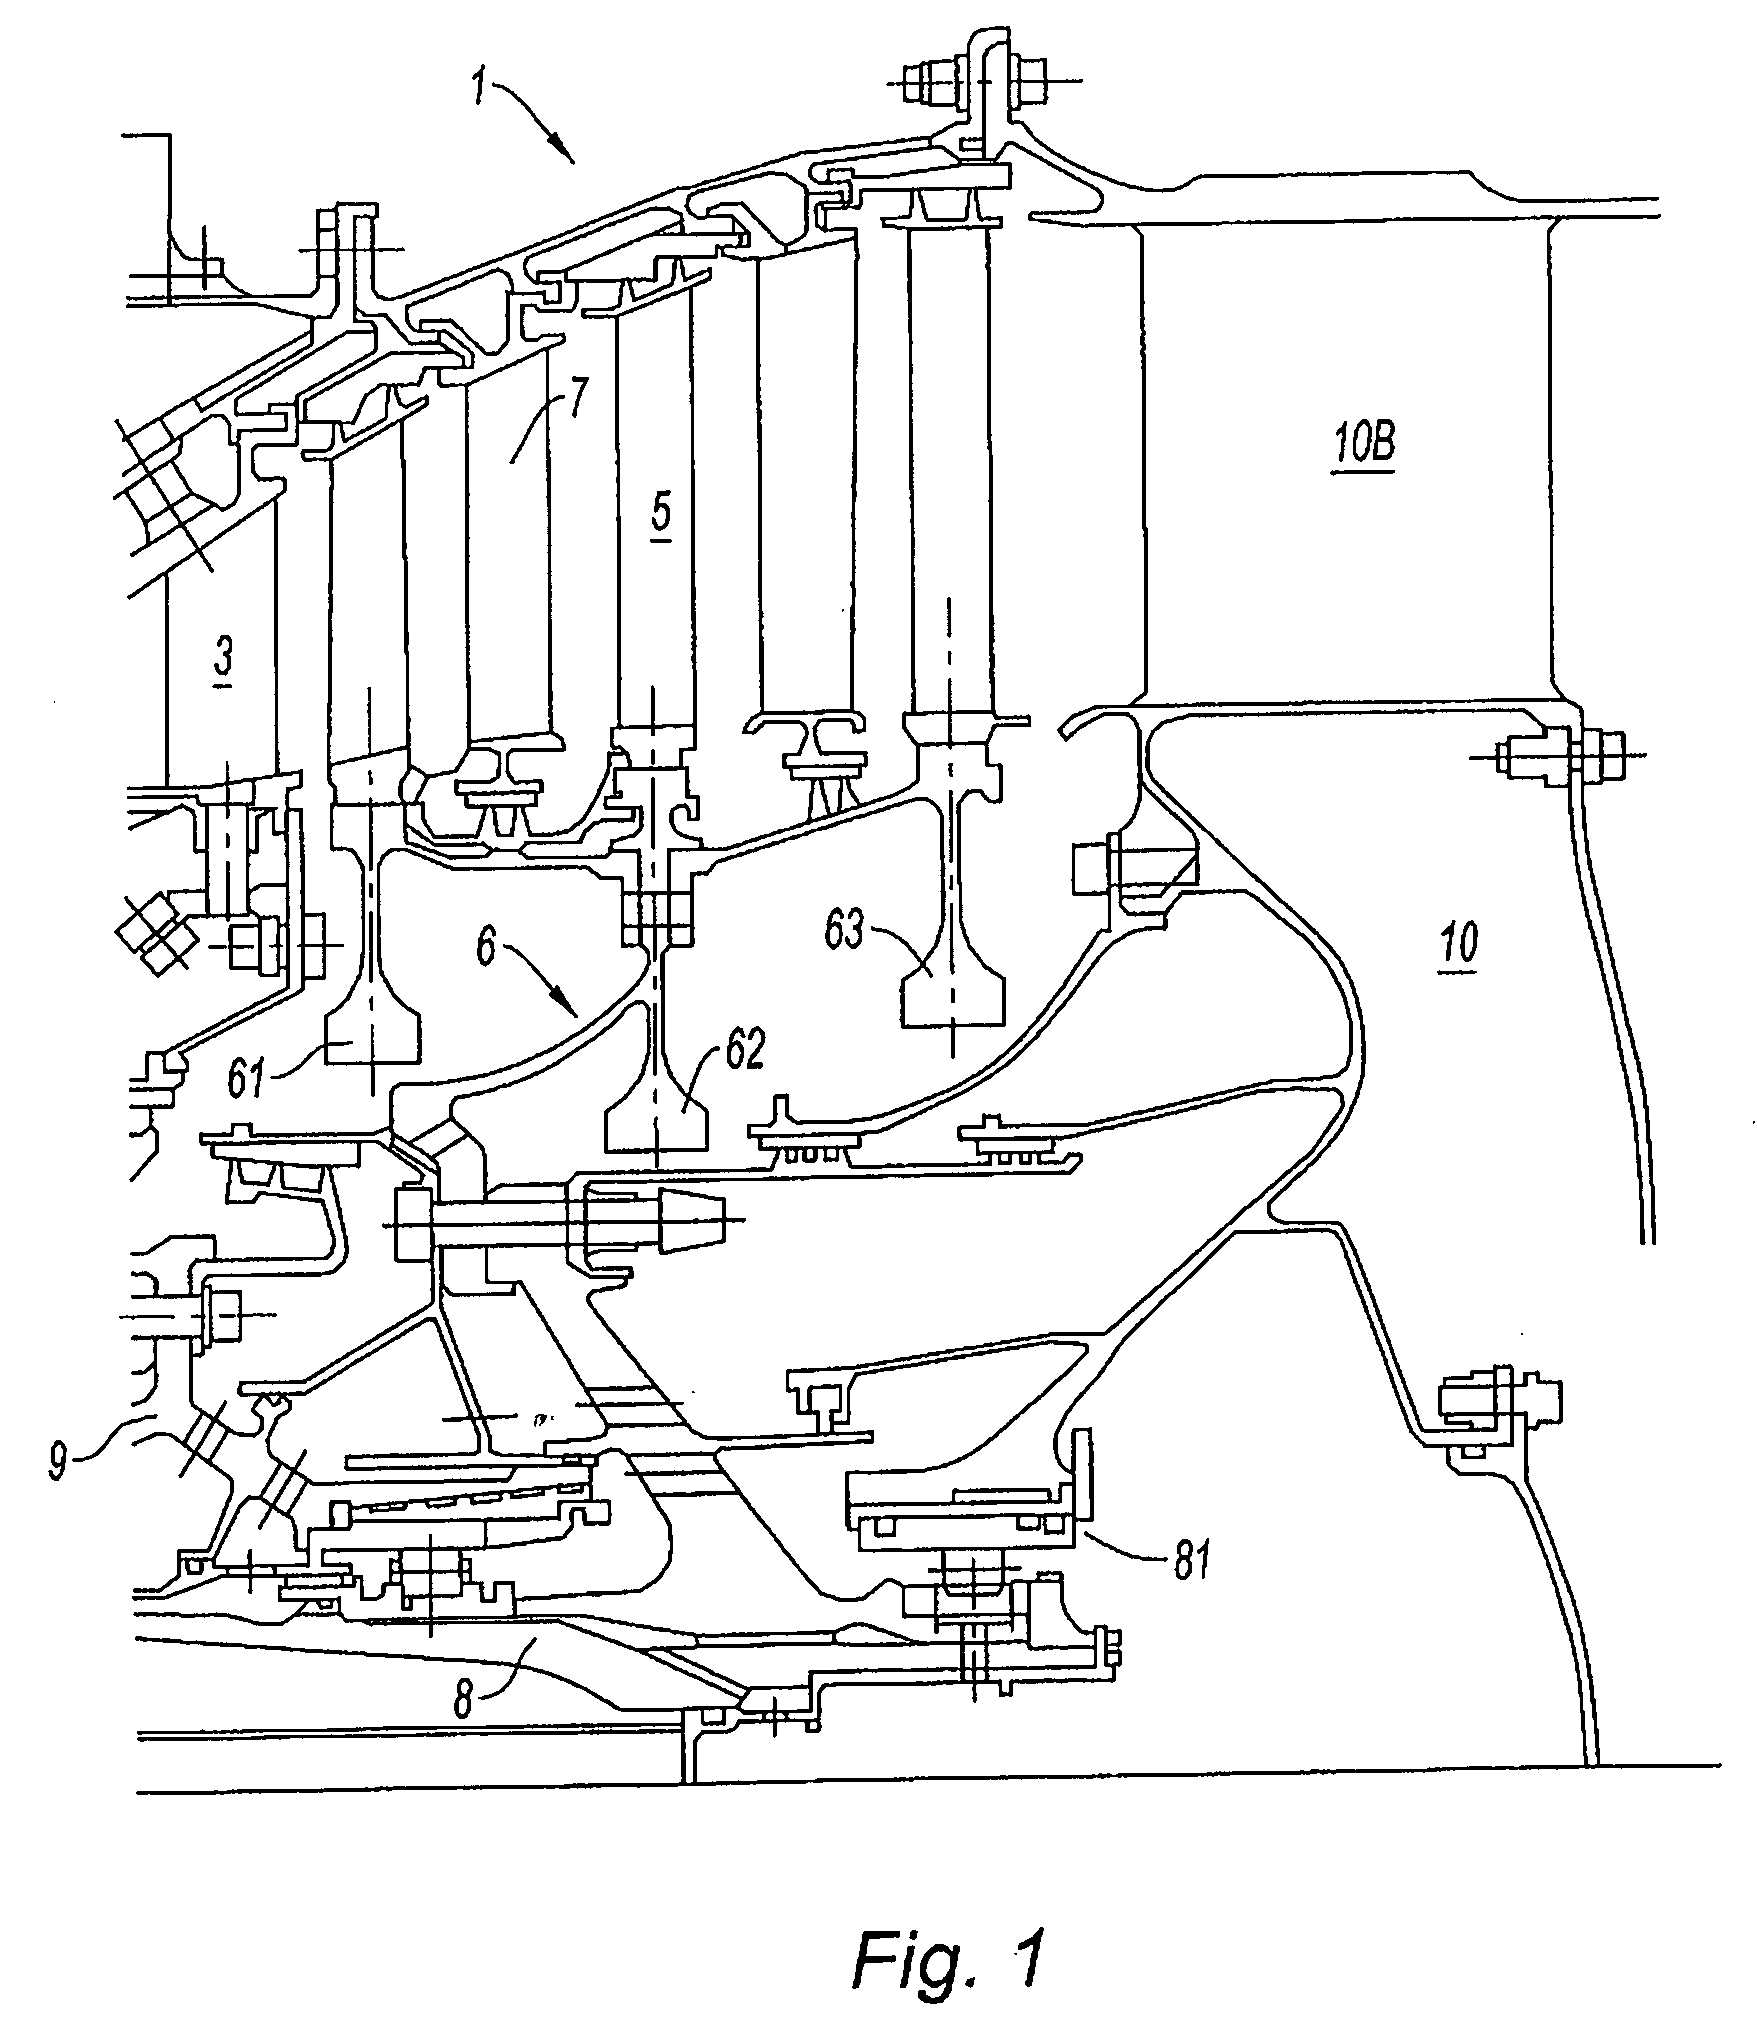 System providing braking in a gas turbine engine in the event of the turbine shaft breaking